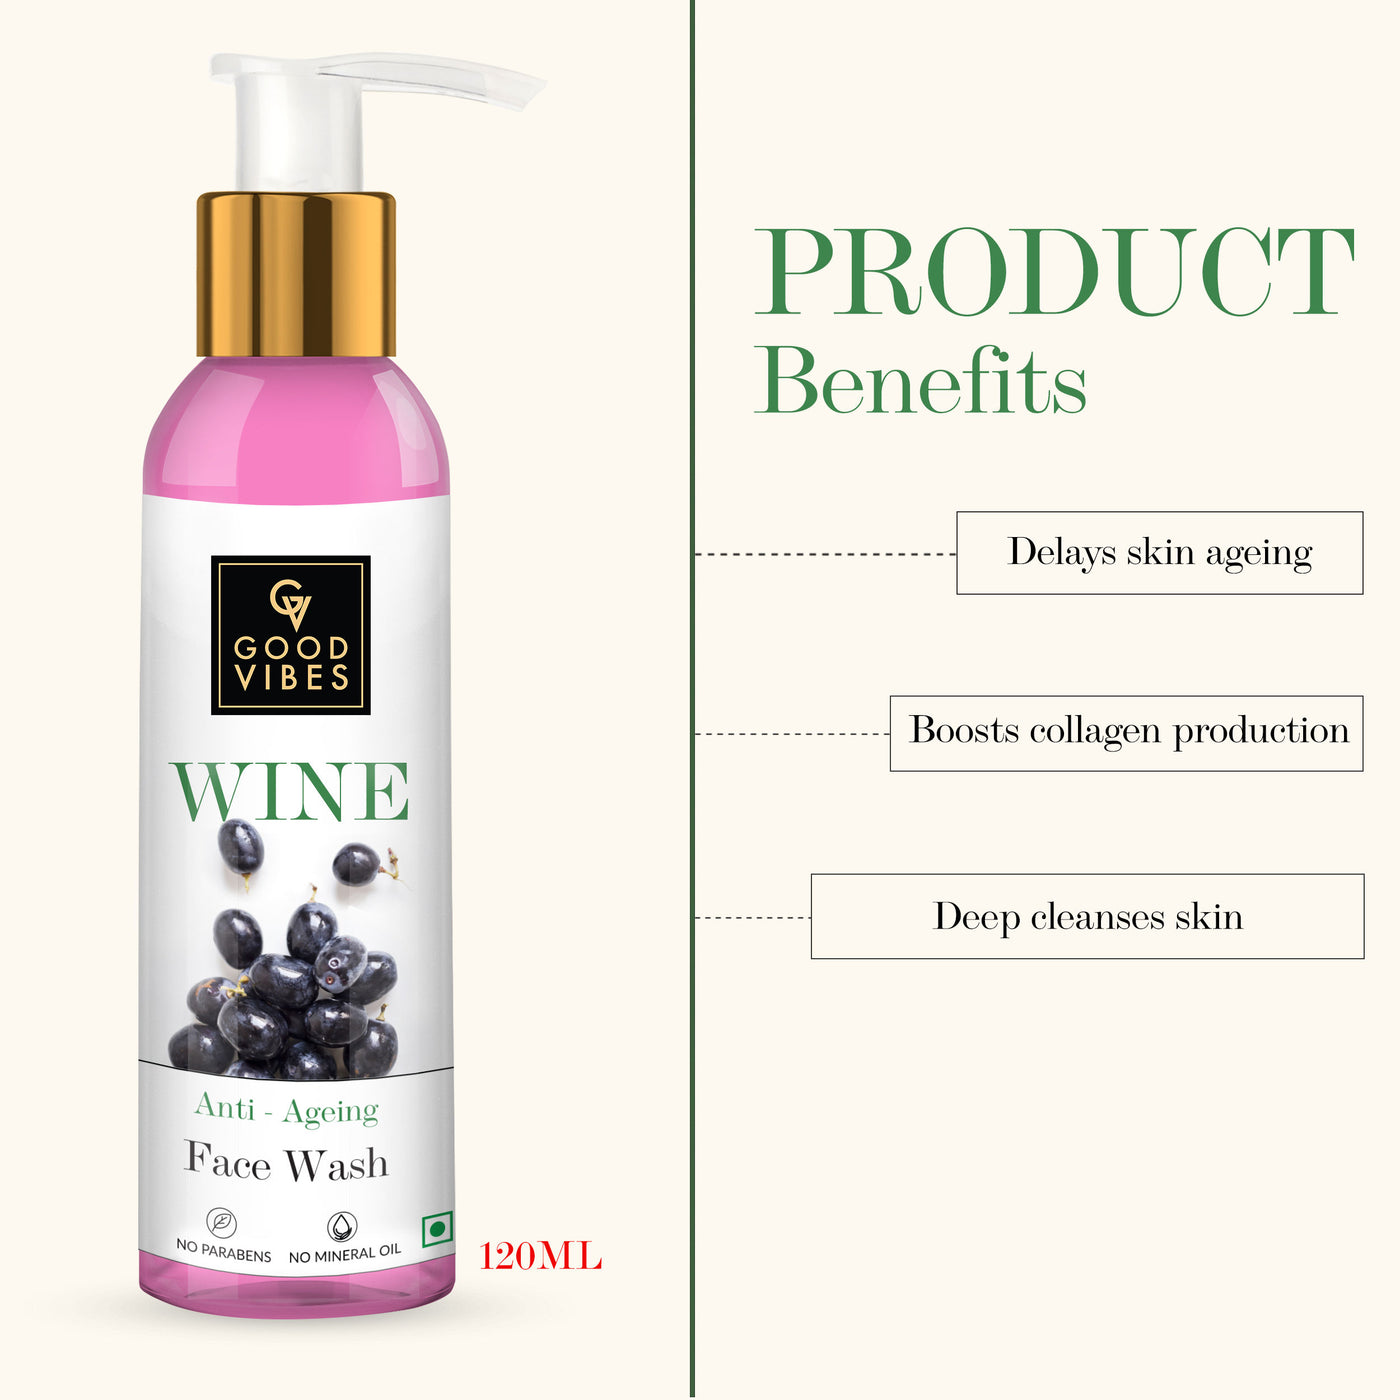 good-vibes-anti-ageing-face-wash-wine-120-ml-97-72-2